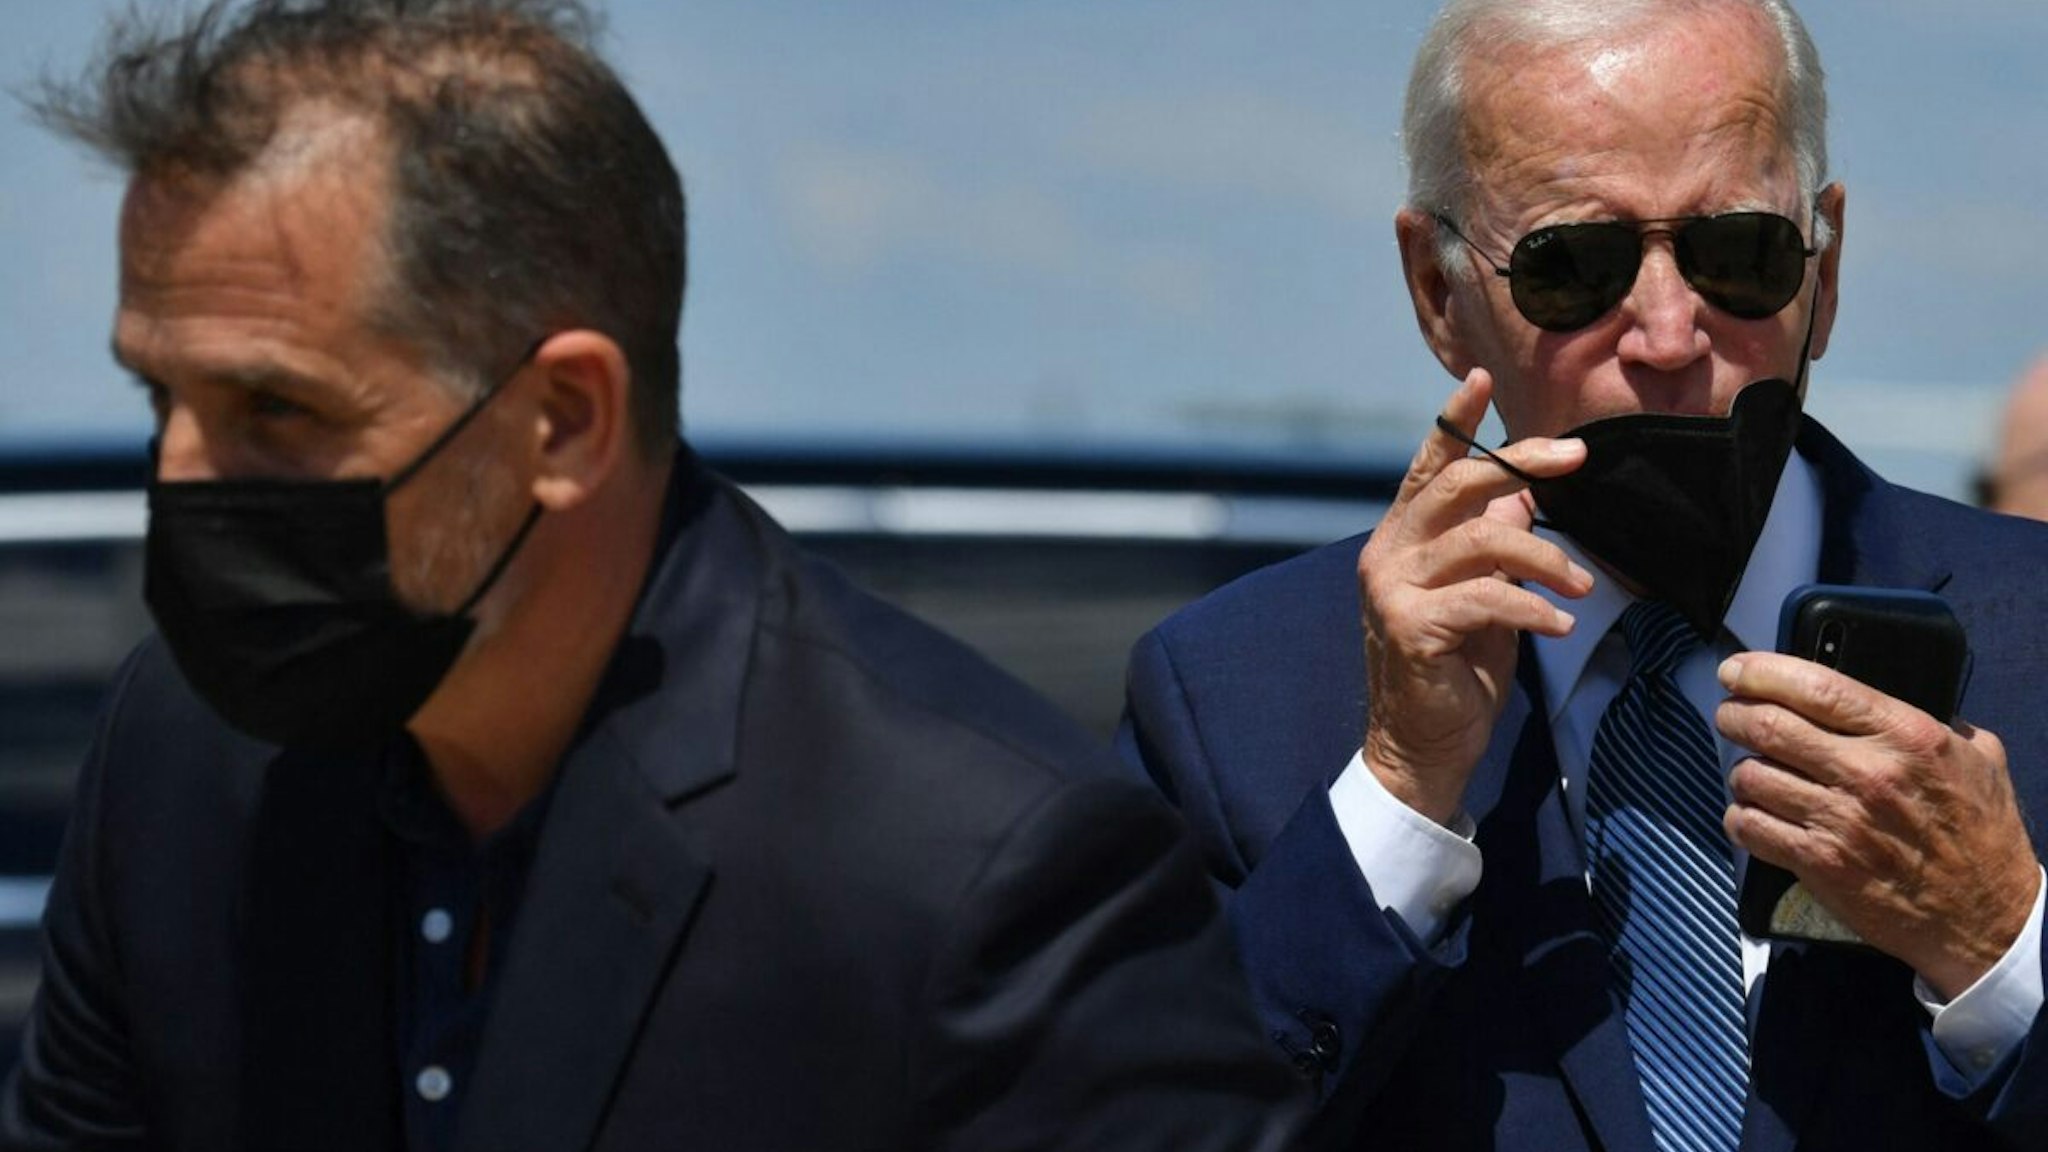 US President Joe Biden (R) and his son Hunter Biden walk to a vehicle after disembarking Air Force One upon arrival at Joint Base Andrews in Maryland on August 16, 2022, as they return from vacation in Kiawah Island, South Carolina.